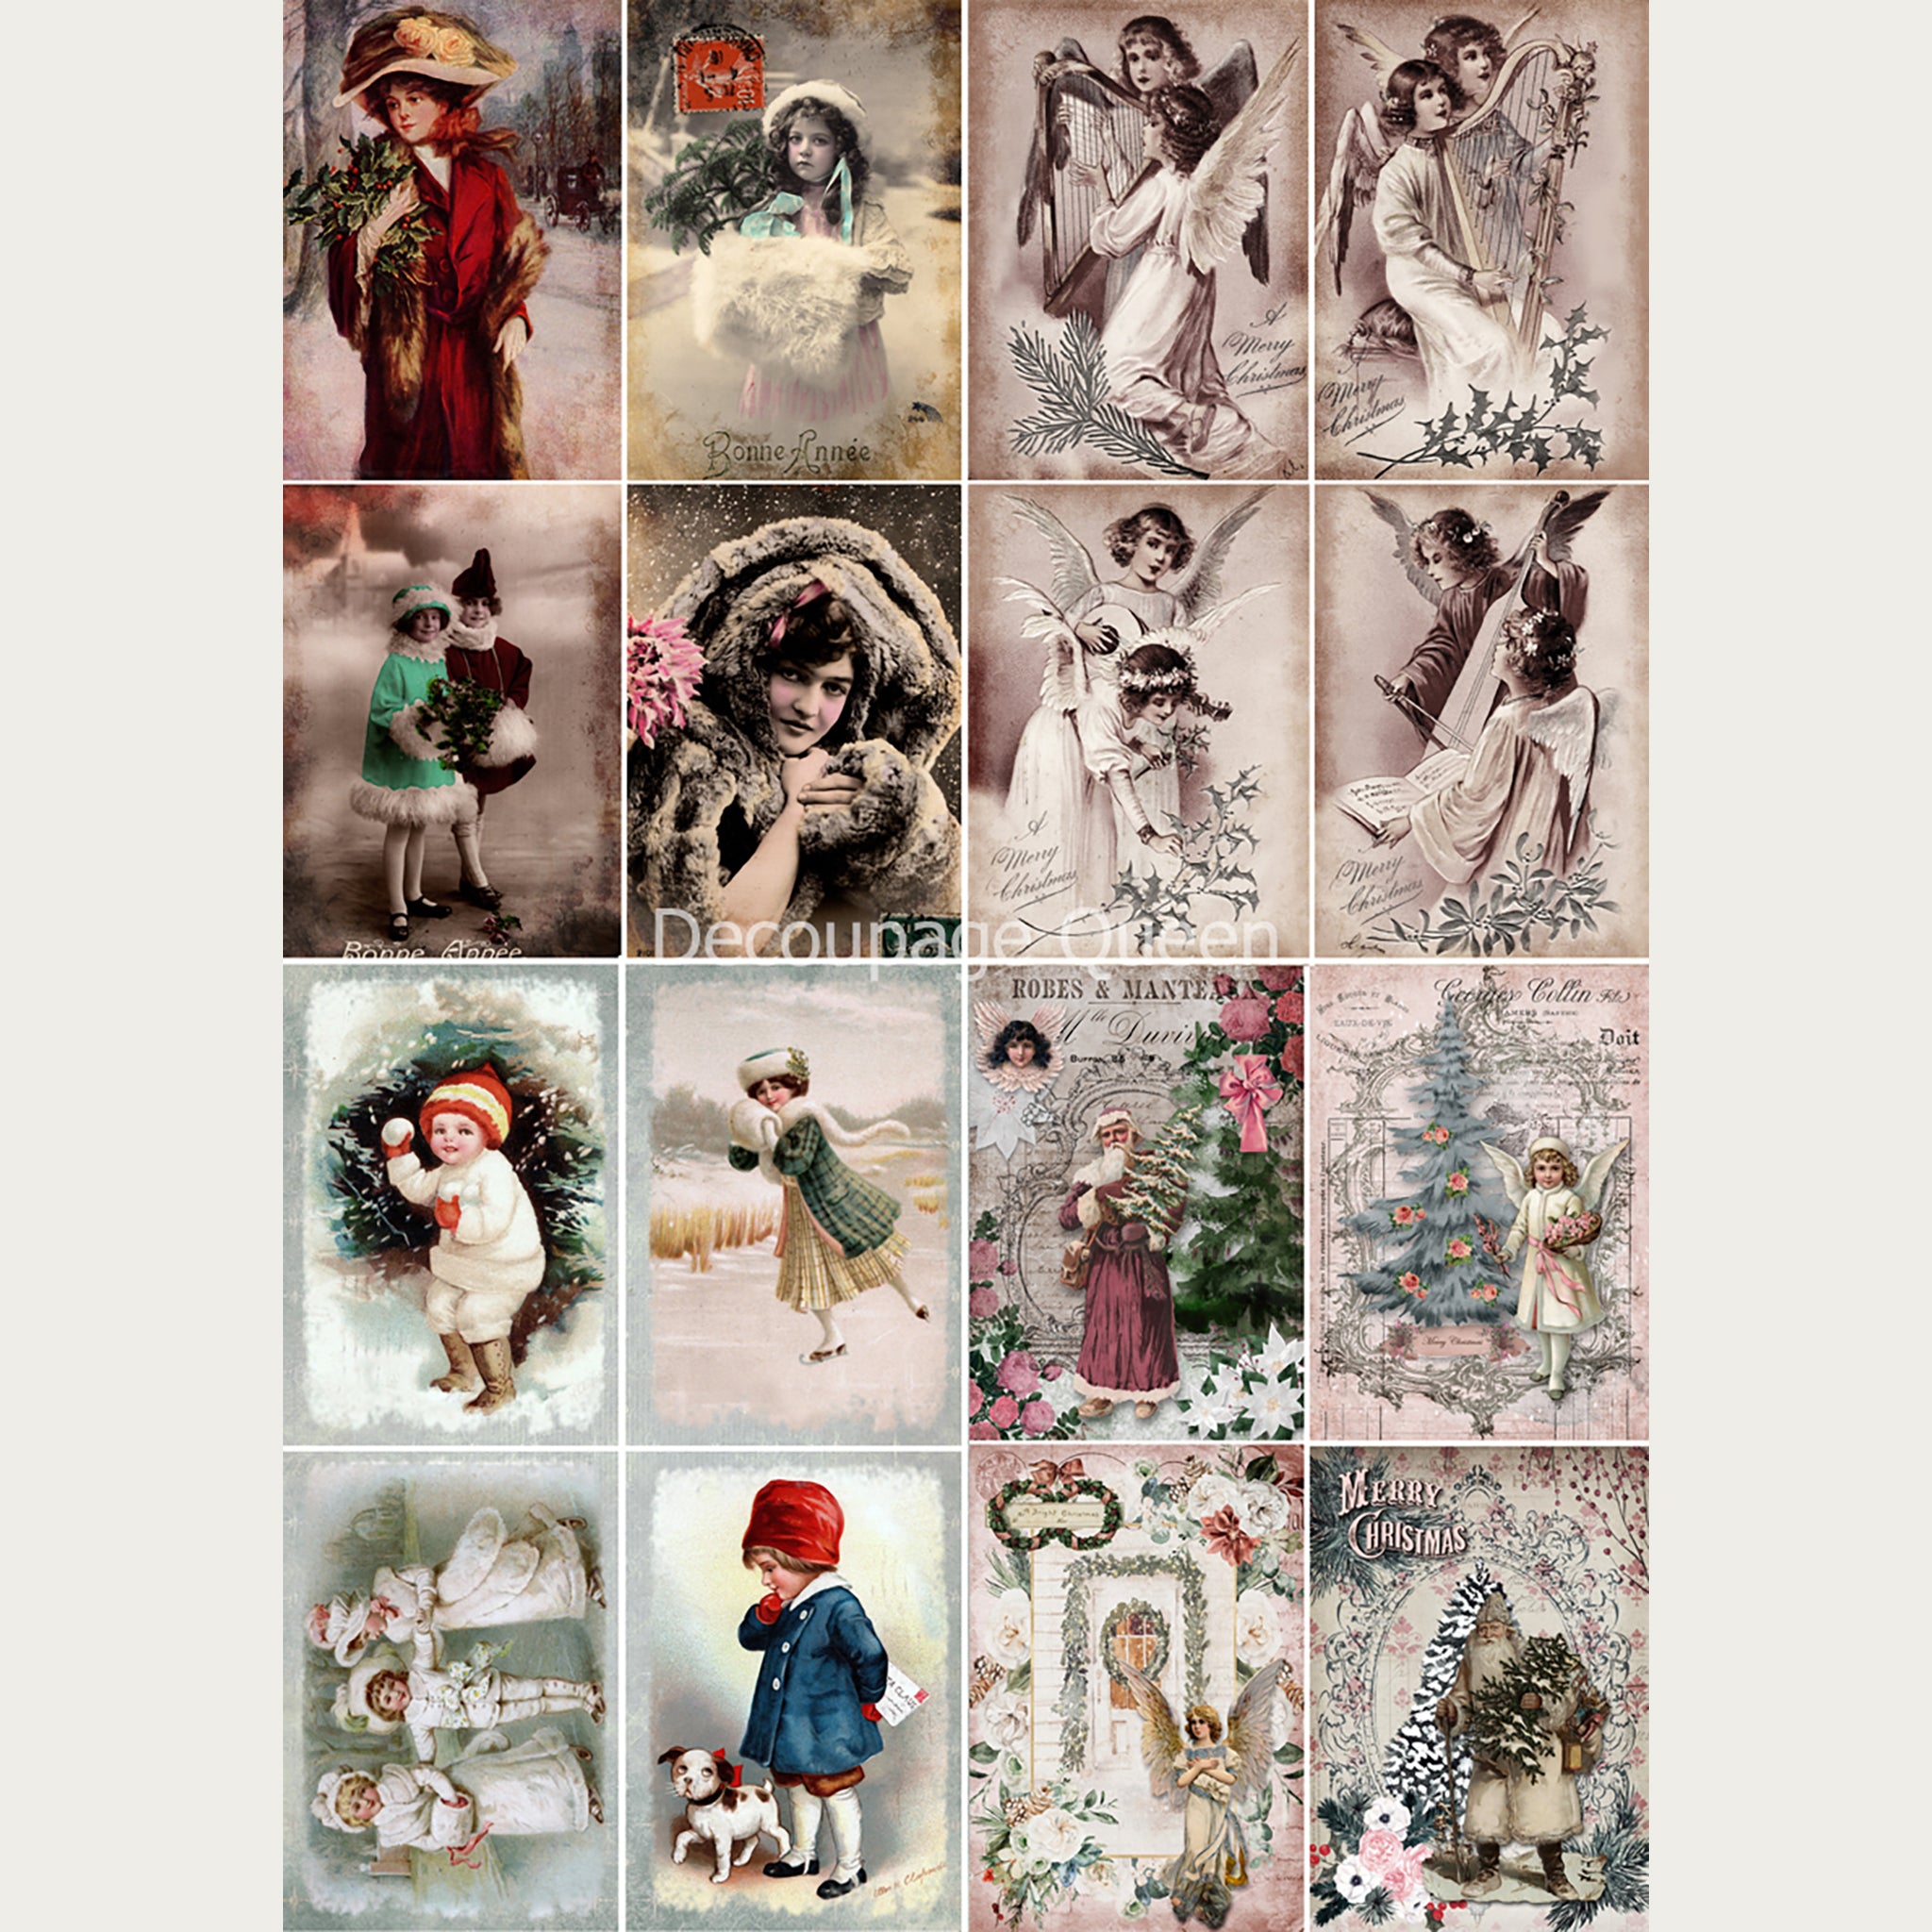 A3 rice paper designs featuring vintage scenes of children and women in winter clothes, Santas, and angels. White borders are on the sides.